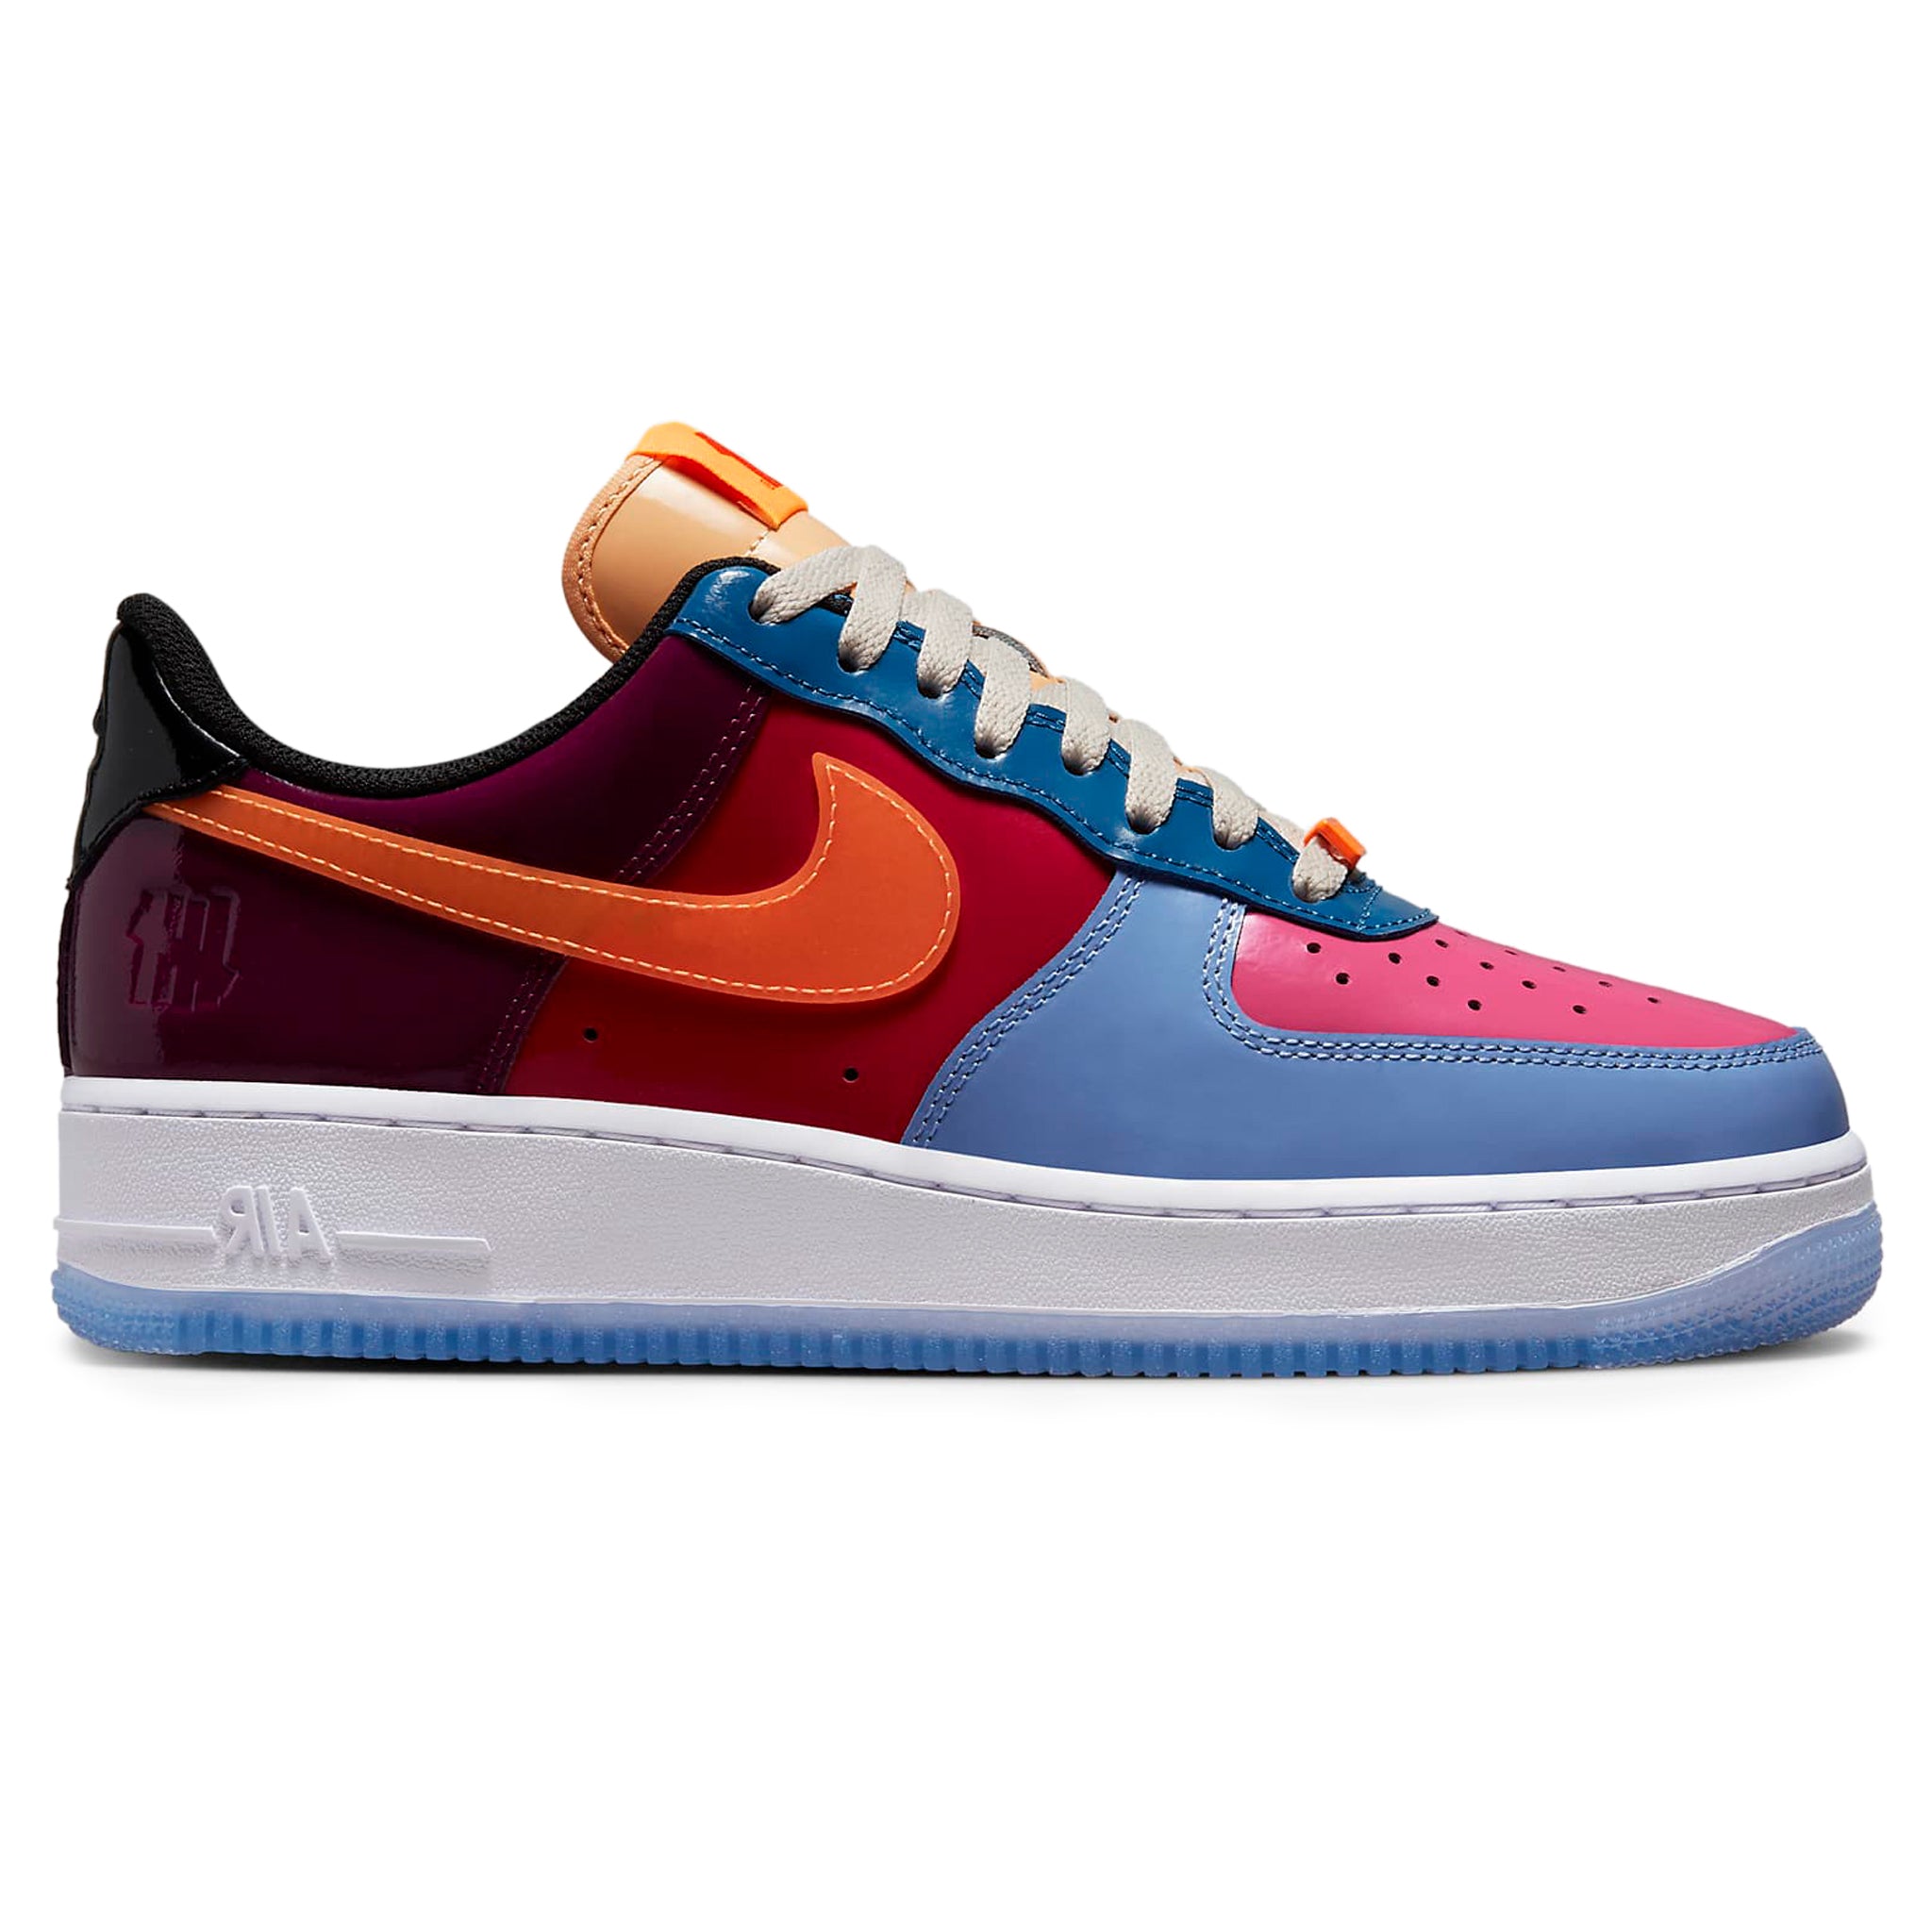 Side view of Undefeated x Nike Air Force 1 Low Multi-Patent DV5255-400